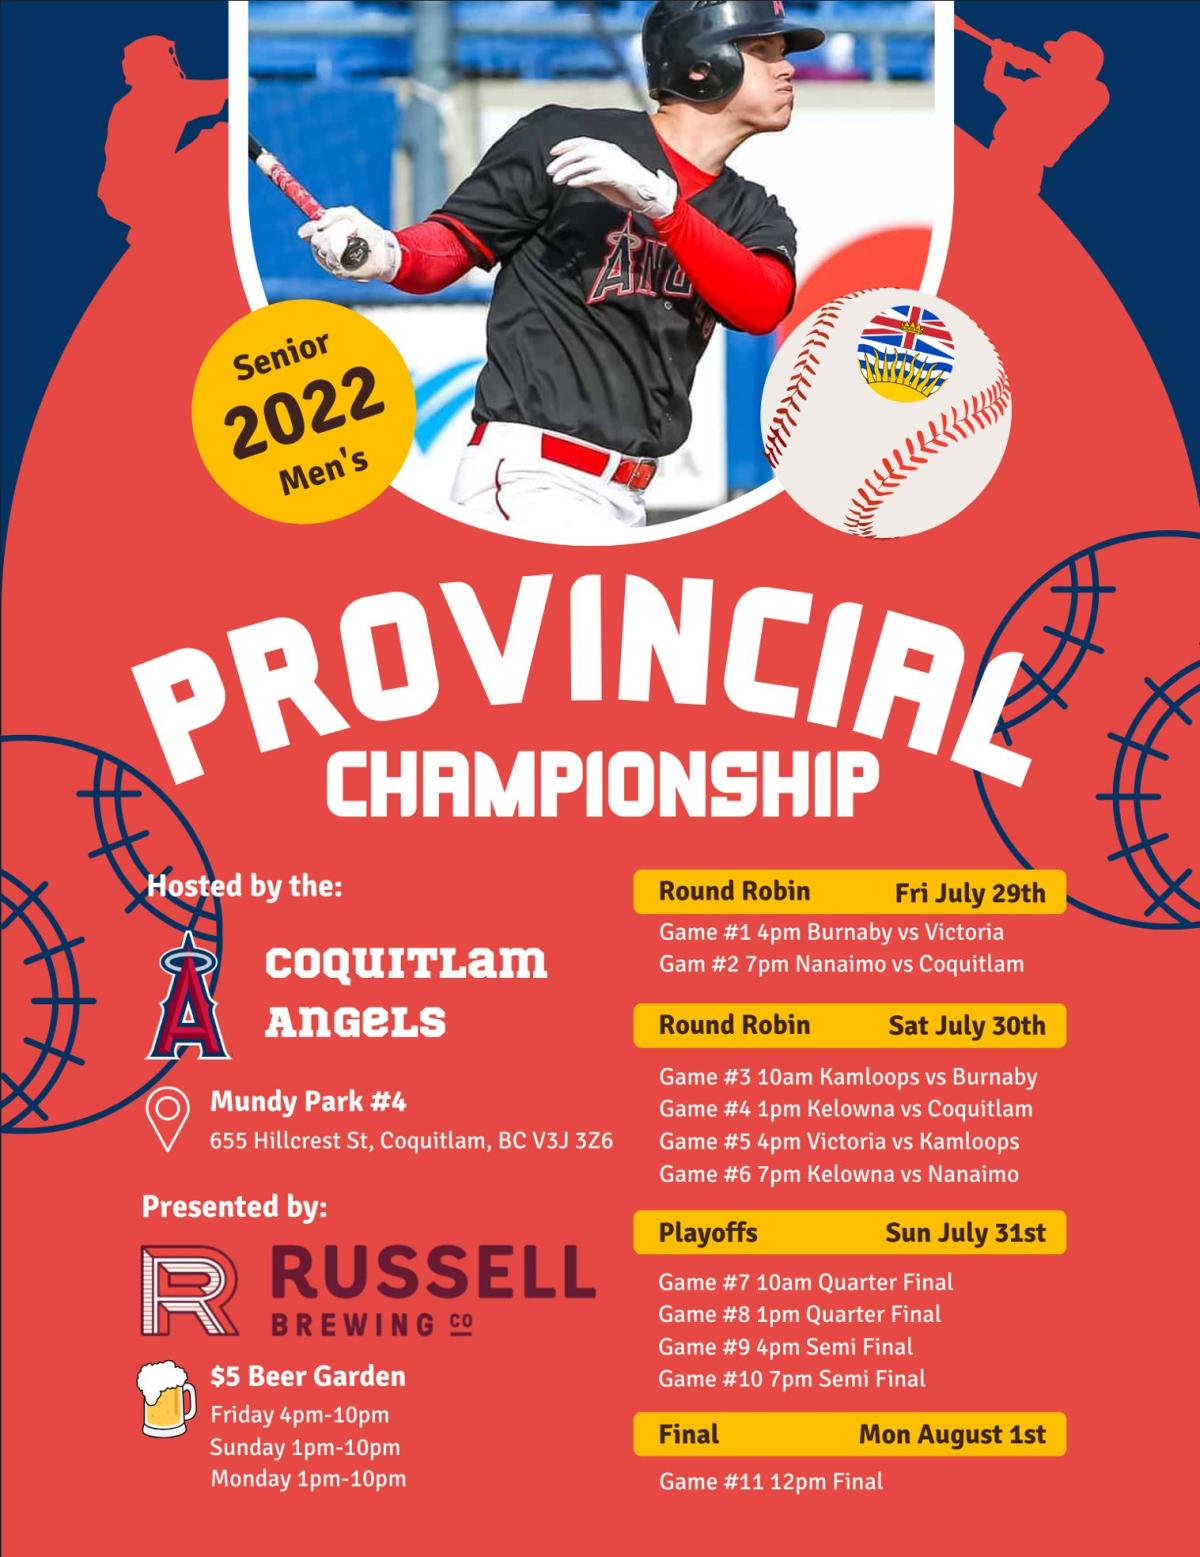 The 2022 BC Men's Provincial Championship at Mundy Park presented by Russell Brewing